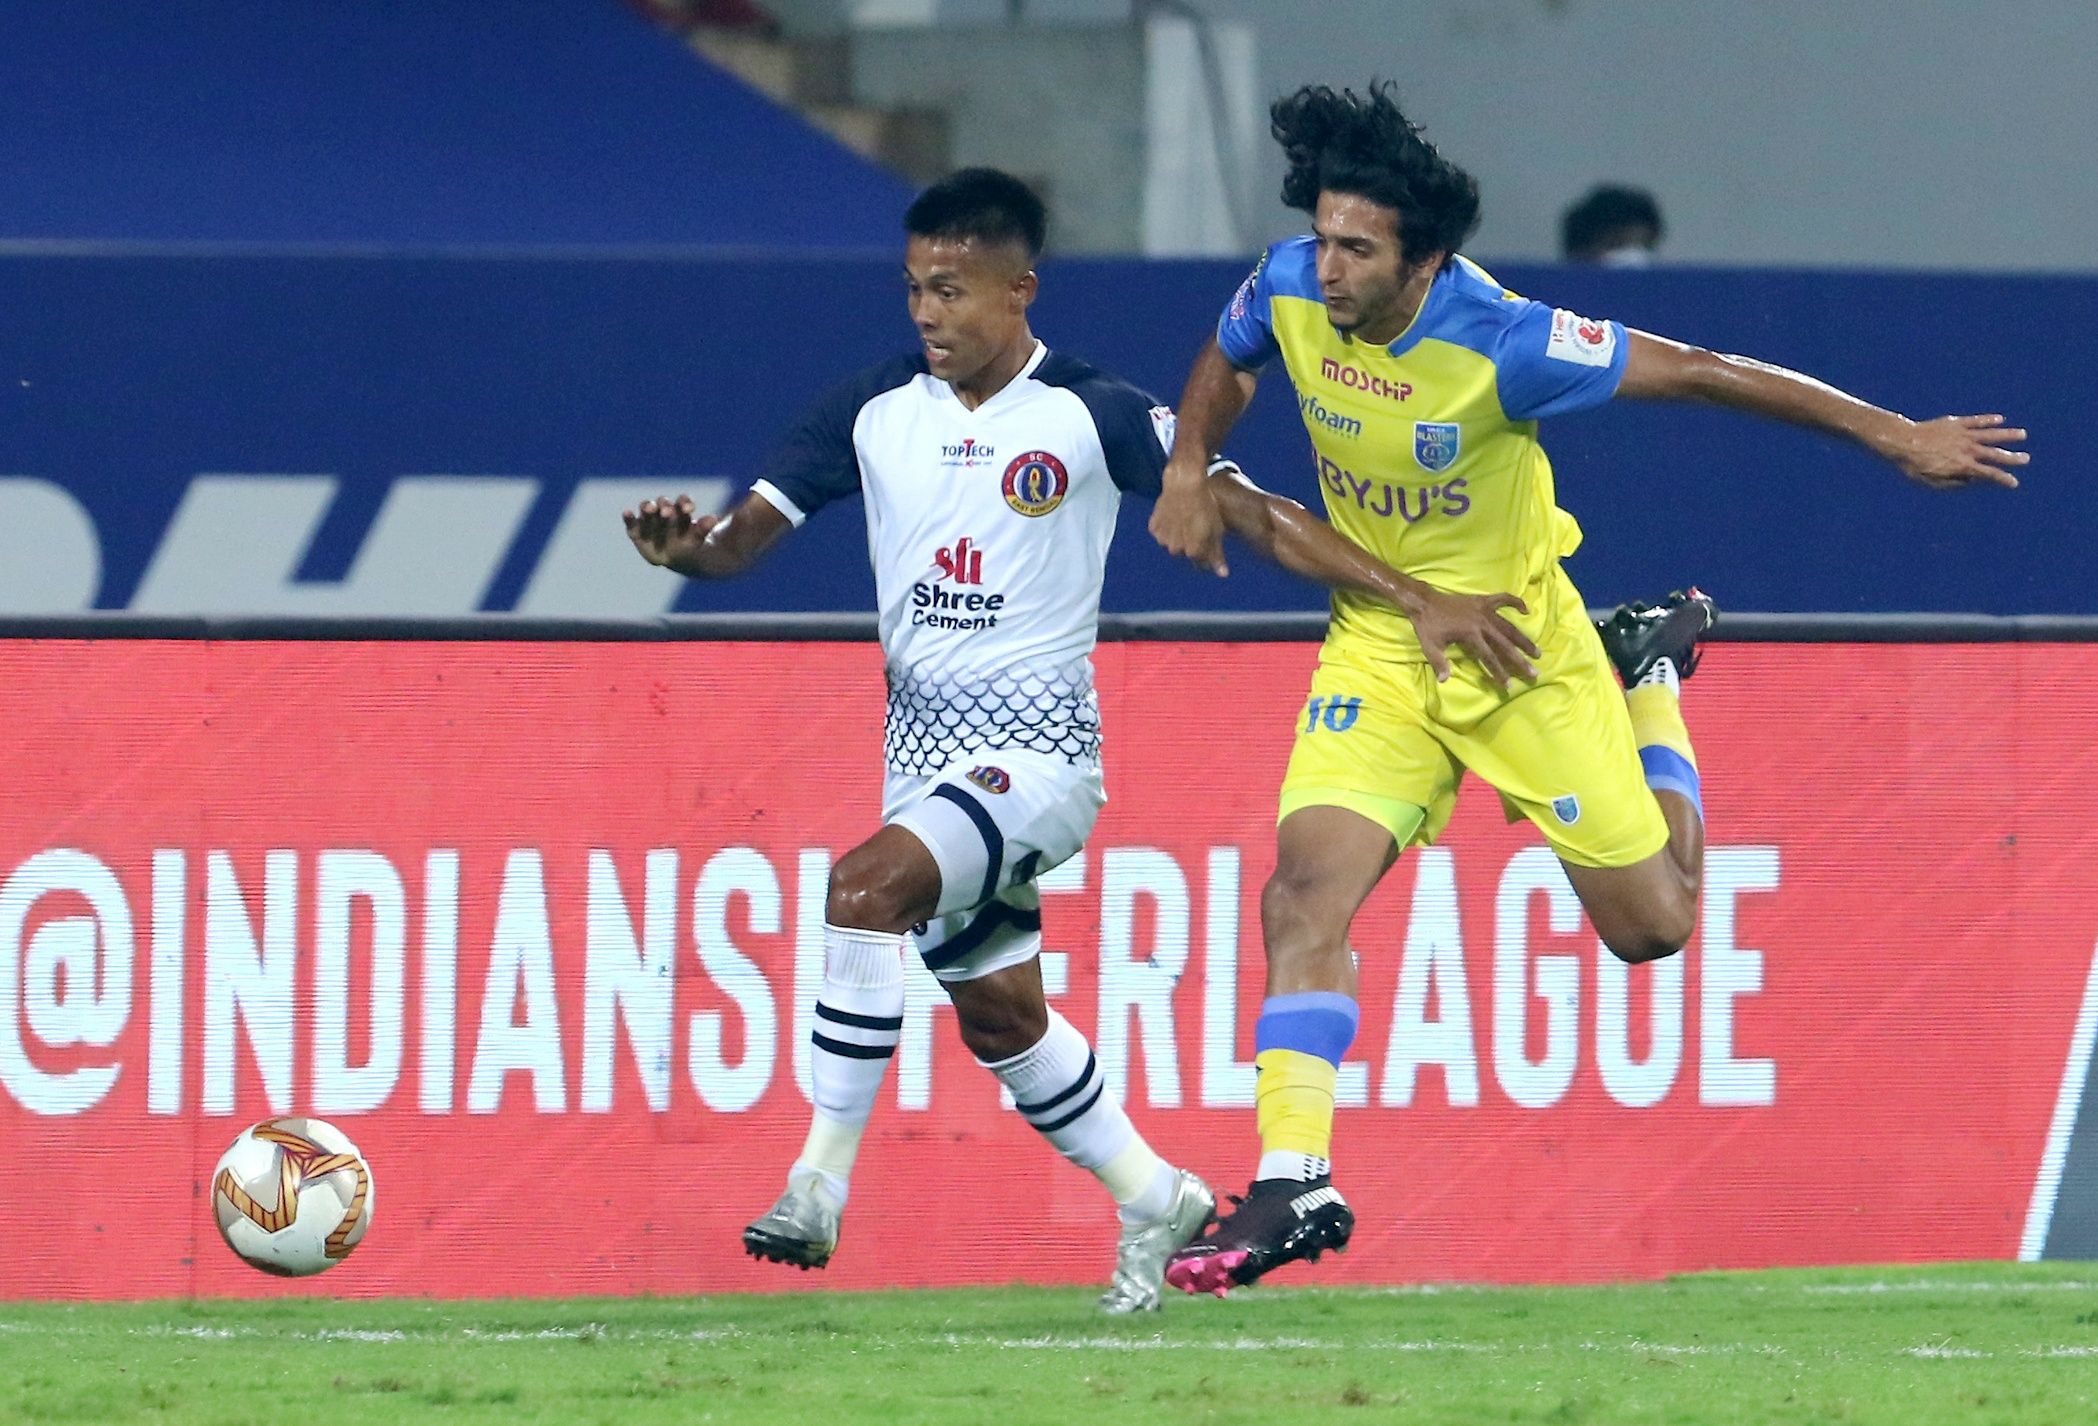 ISL 2020: Kerala’s stoppage-time goal leads to 1-1 draw, as East Bengal wait for first win